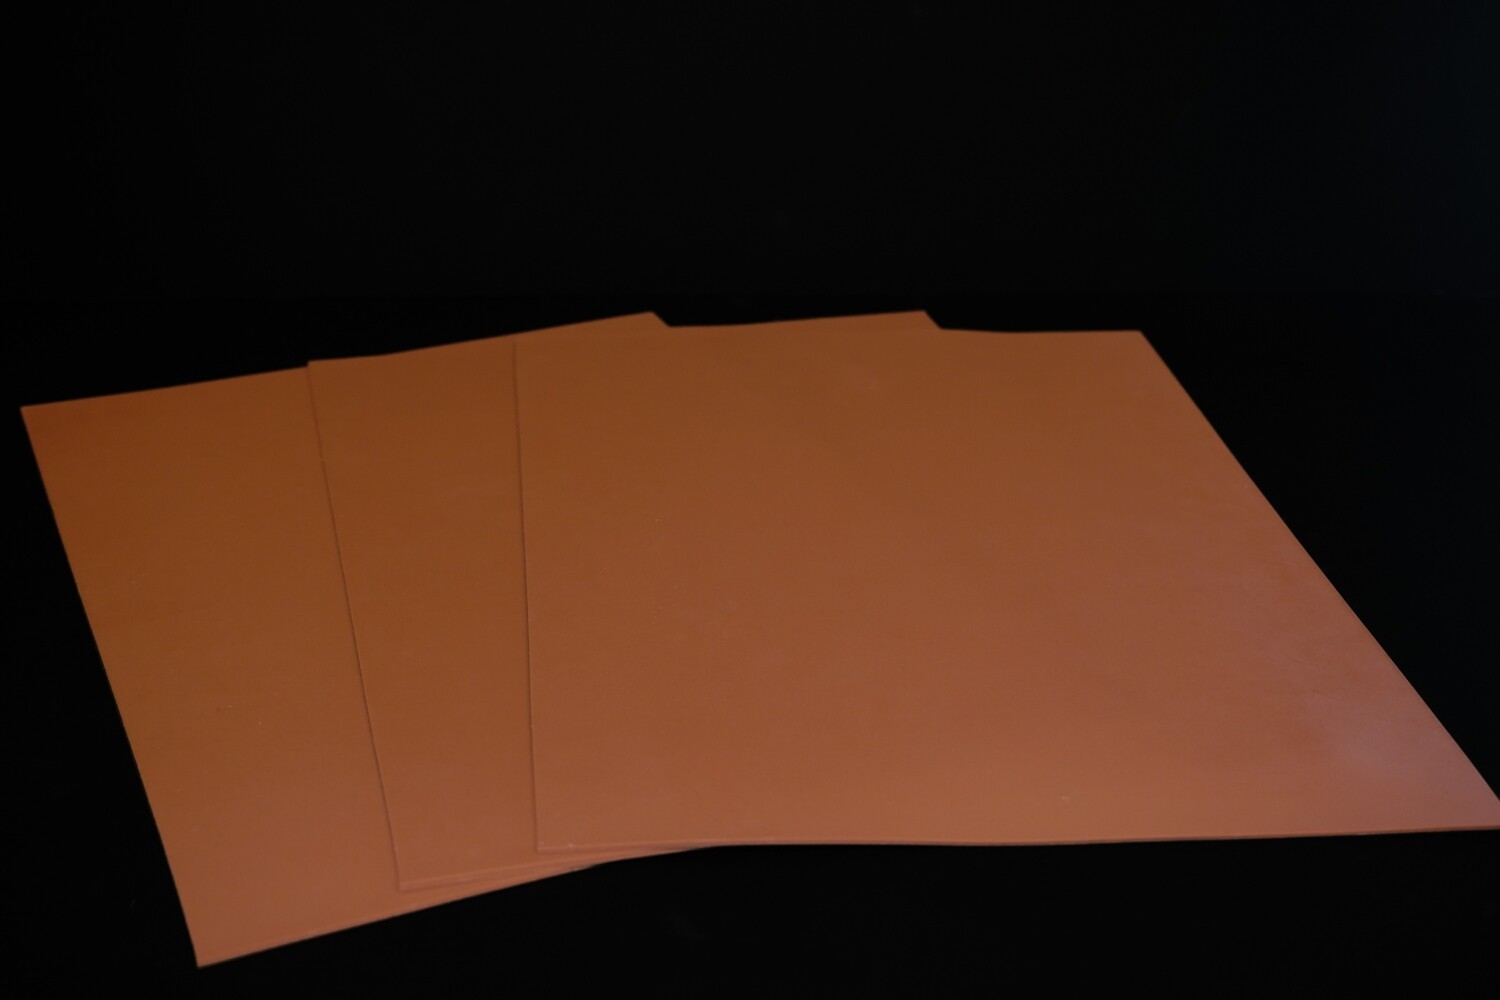 3 x A3 Reelskin sheet (Darker tone) £54.99 (discount codes not applicable to this offer)